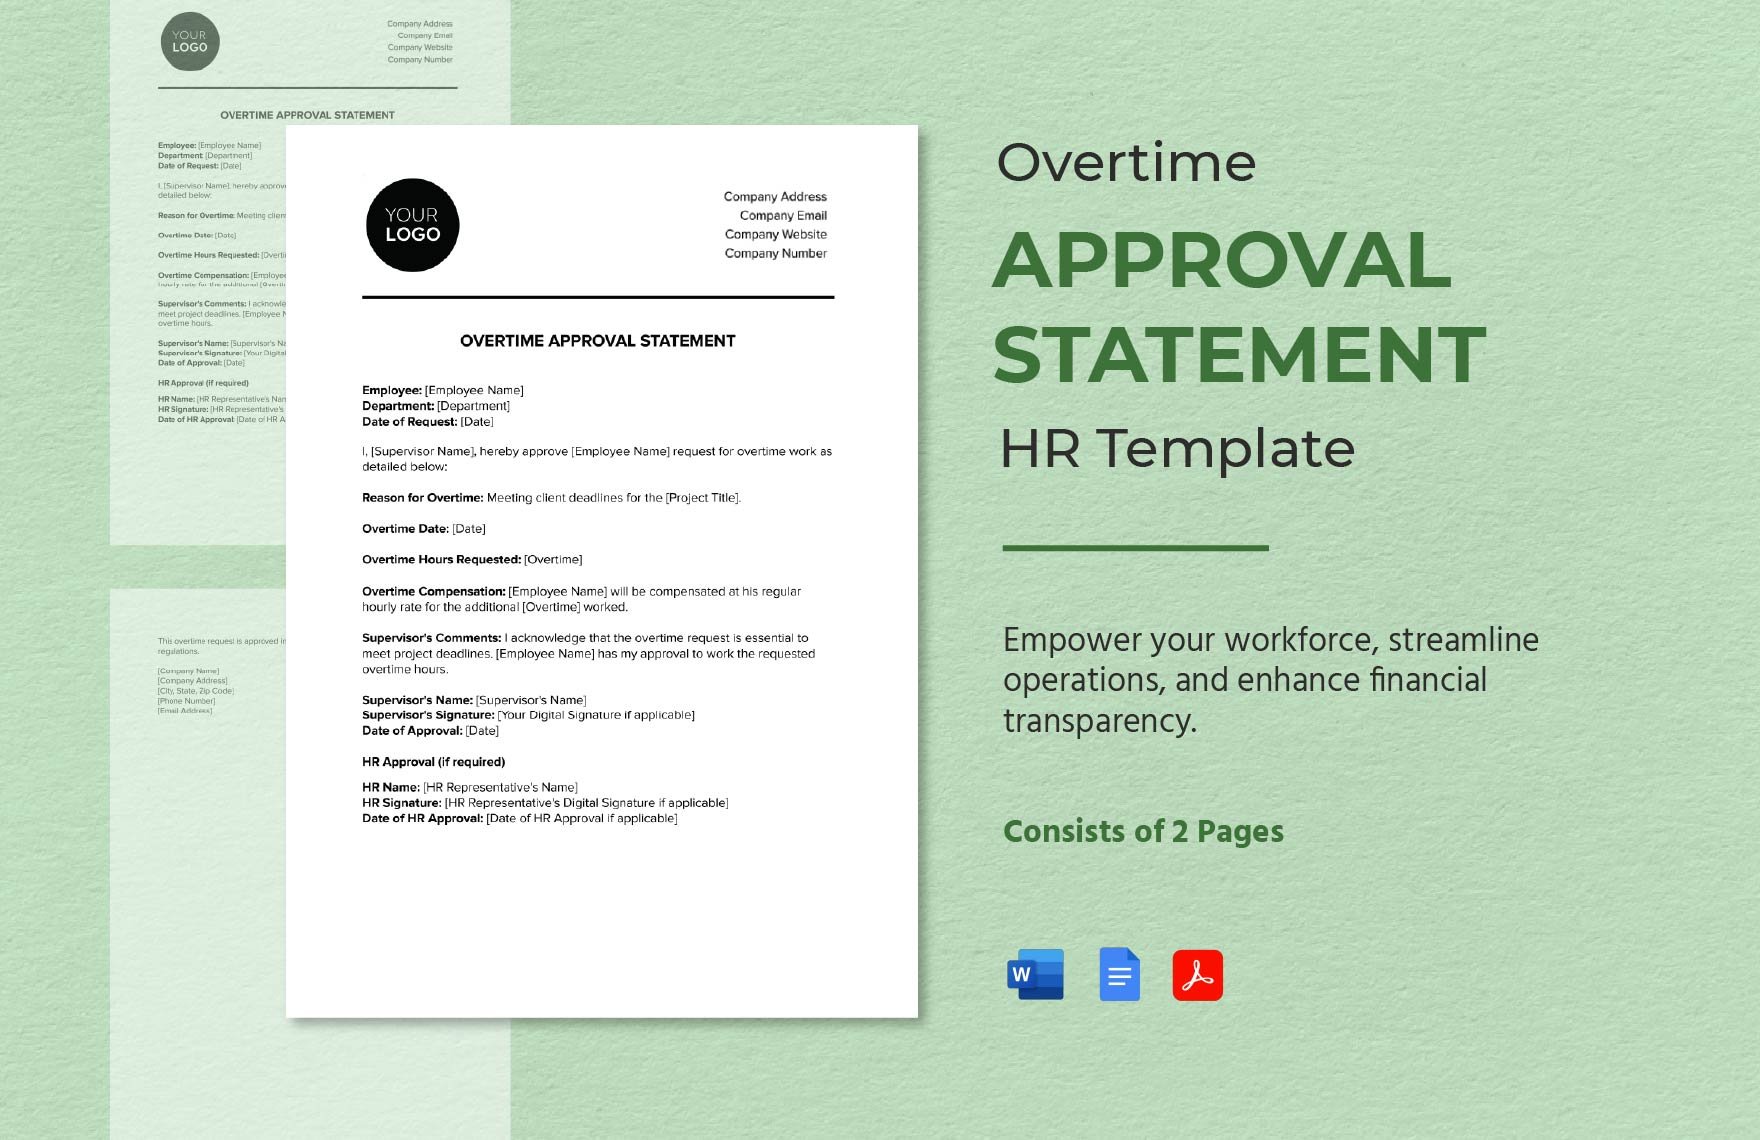 Overtime Approval Statement HR Template